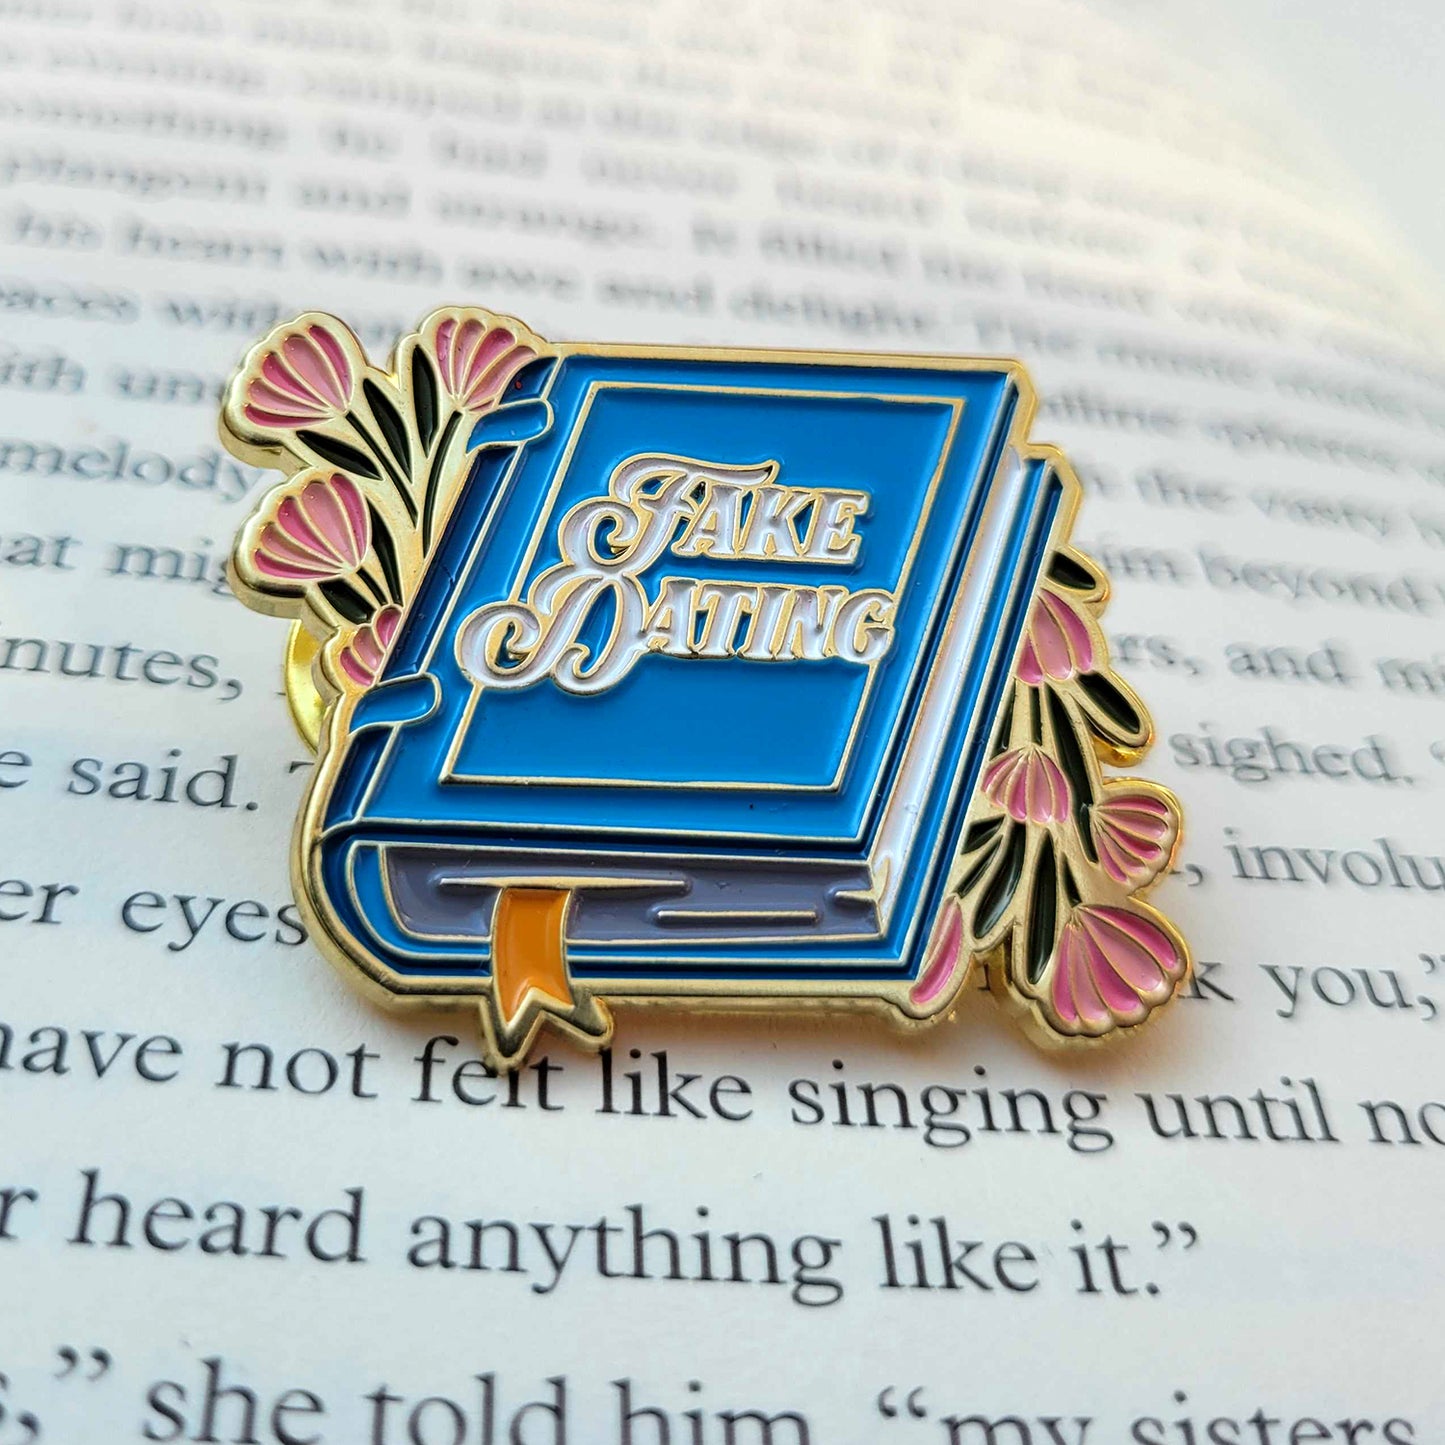 A blue enamel pin on a book page. The pin is shaped like a book, with pink flowers on on each side, White text on the cover says "fake dating."